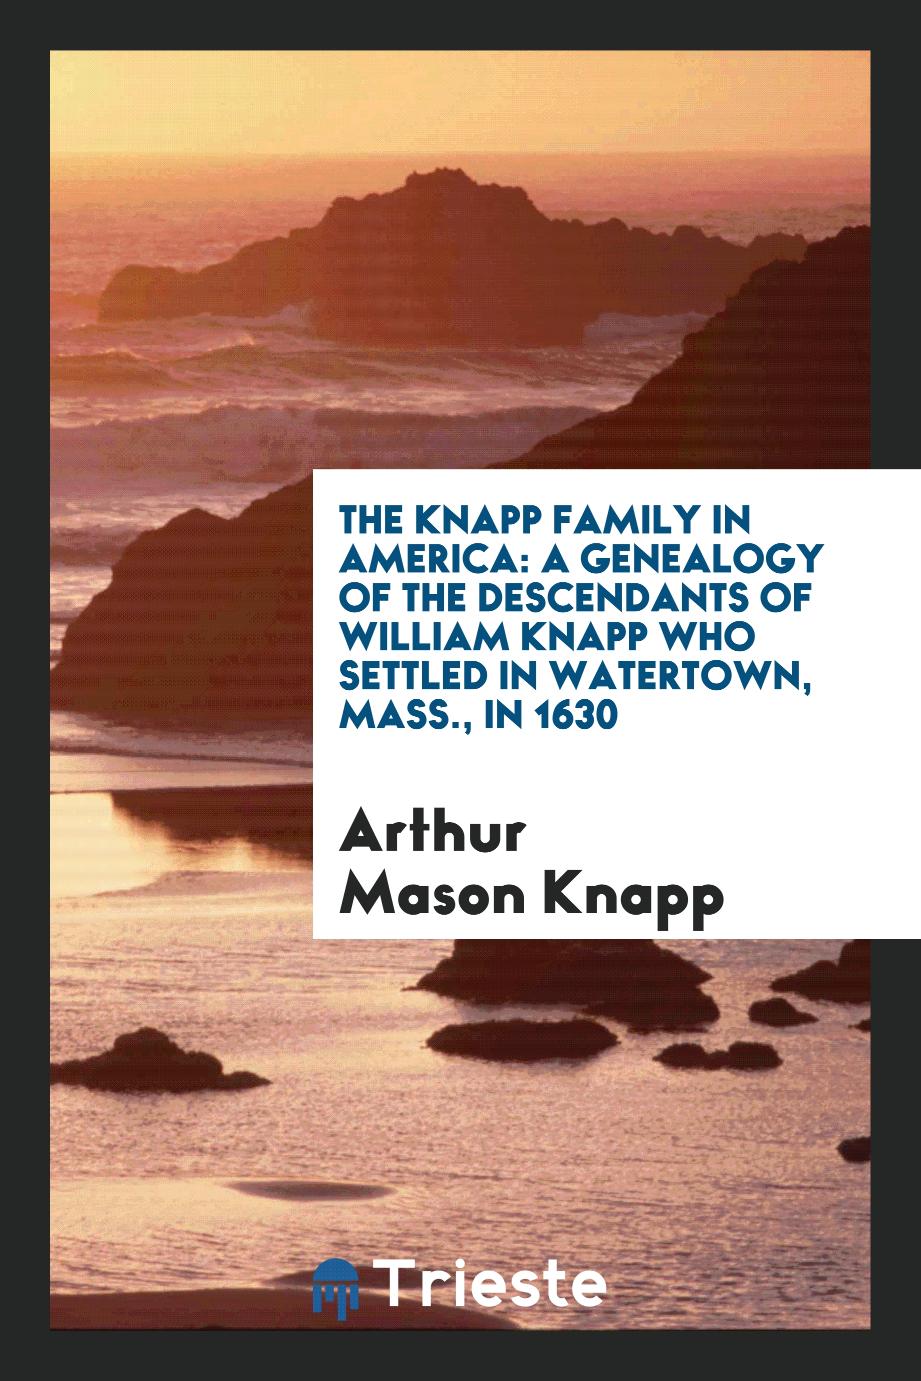 The Knapp Family in America: A Genealogy of the Descendants of William Knapp Who Settled in Watertown, Mass., in 1630